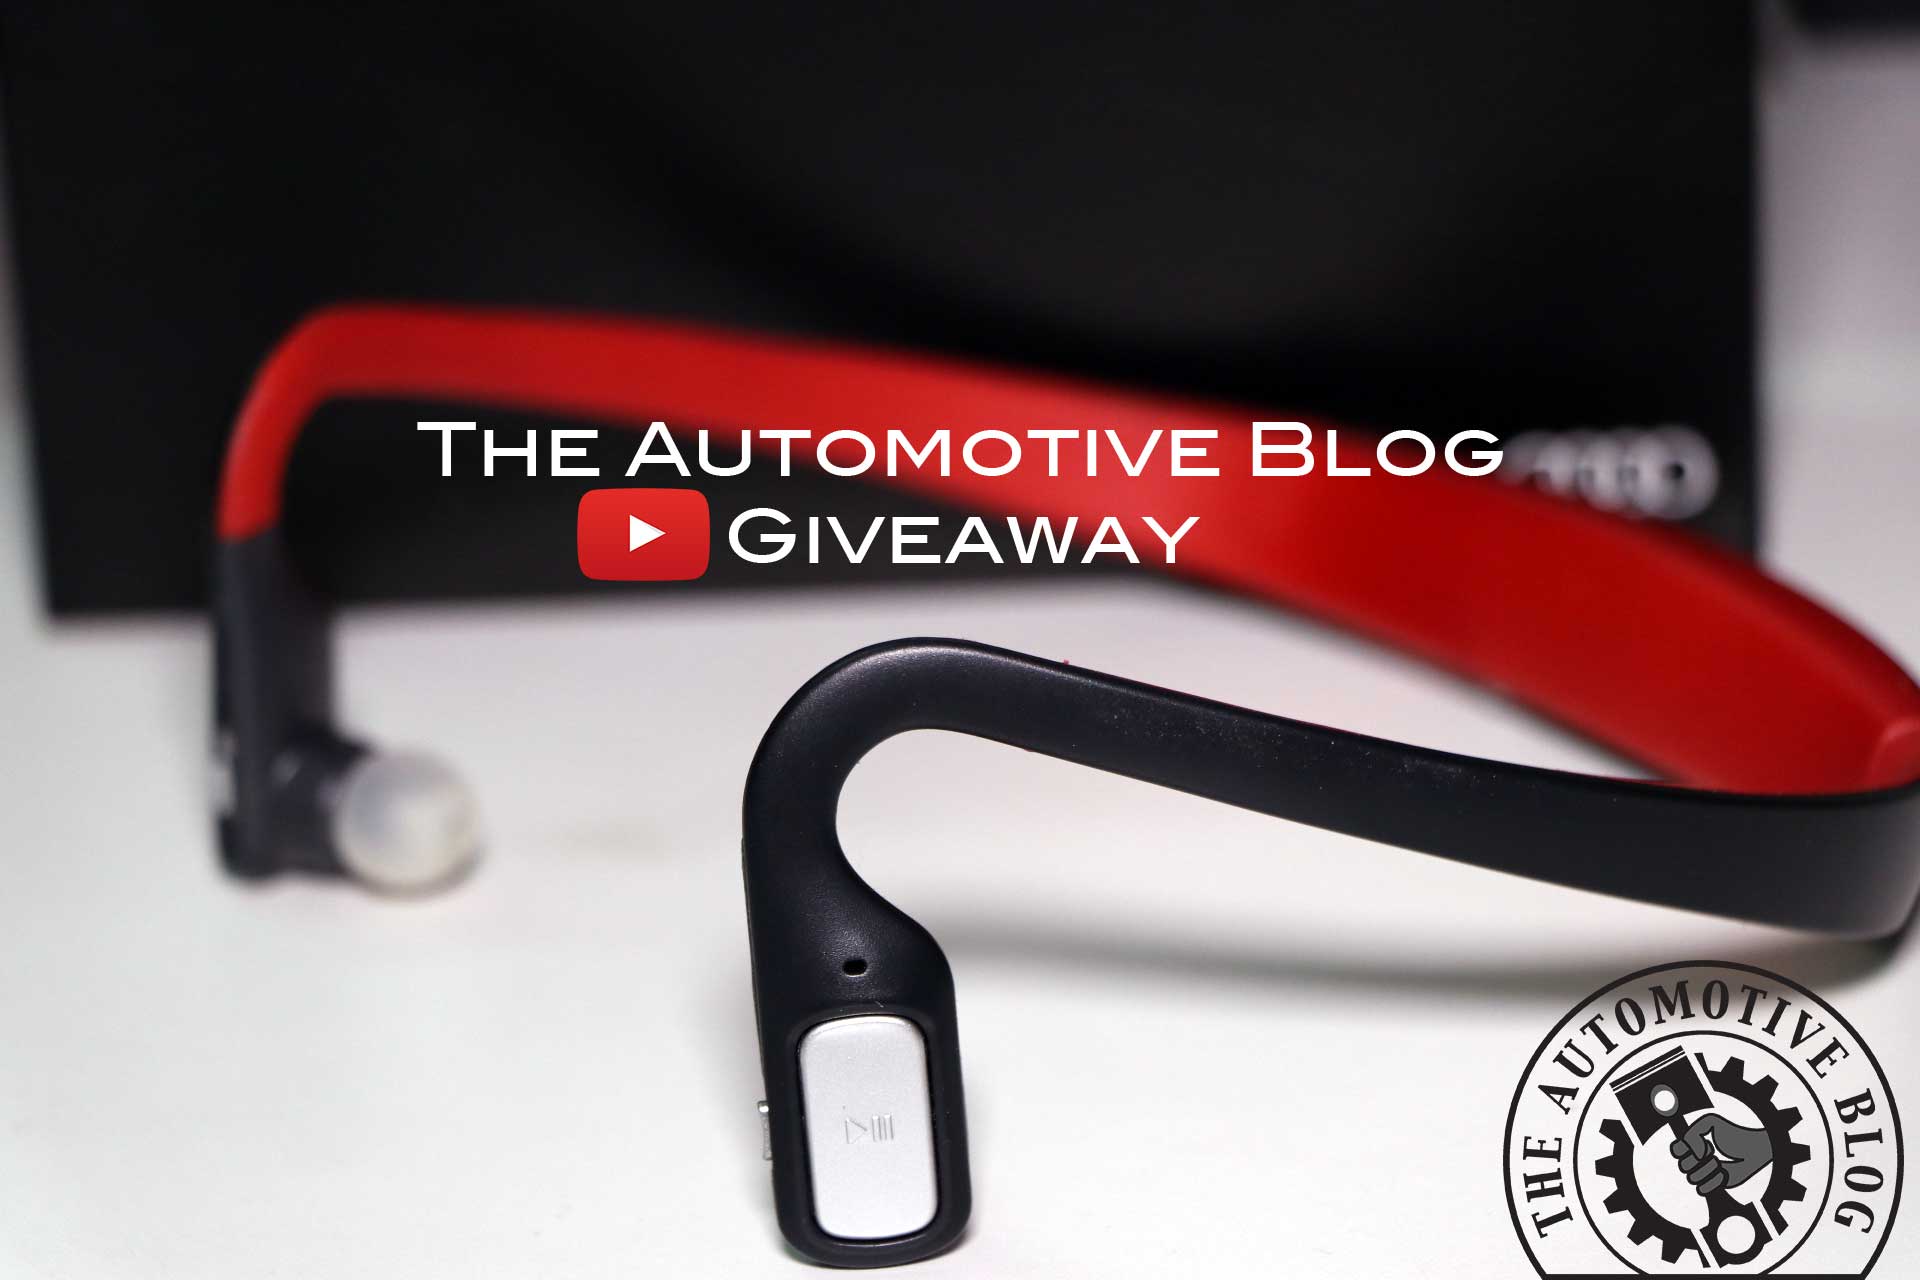 The Automotive Blog - YouTube Giveaway